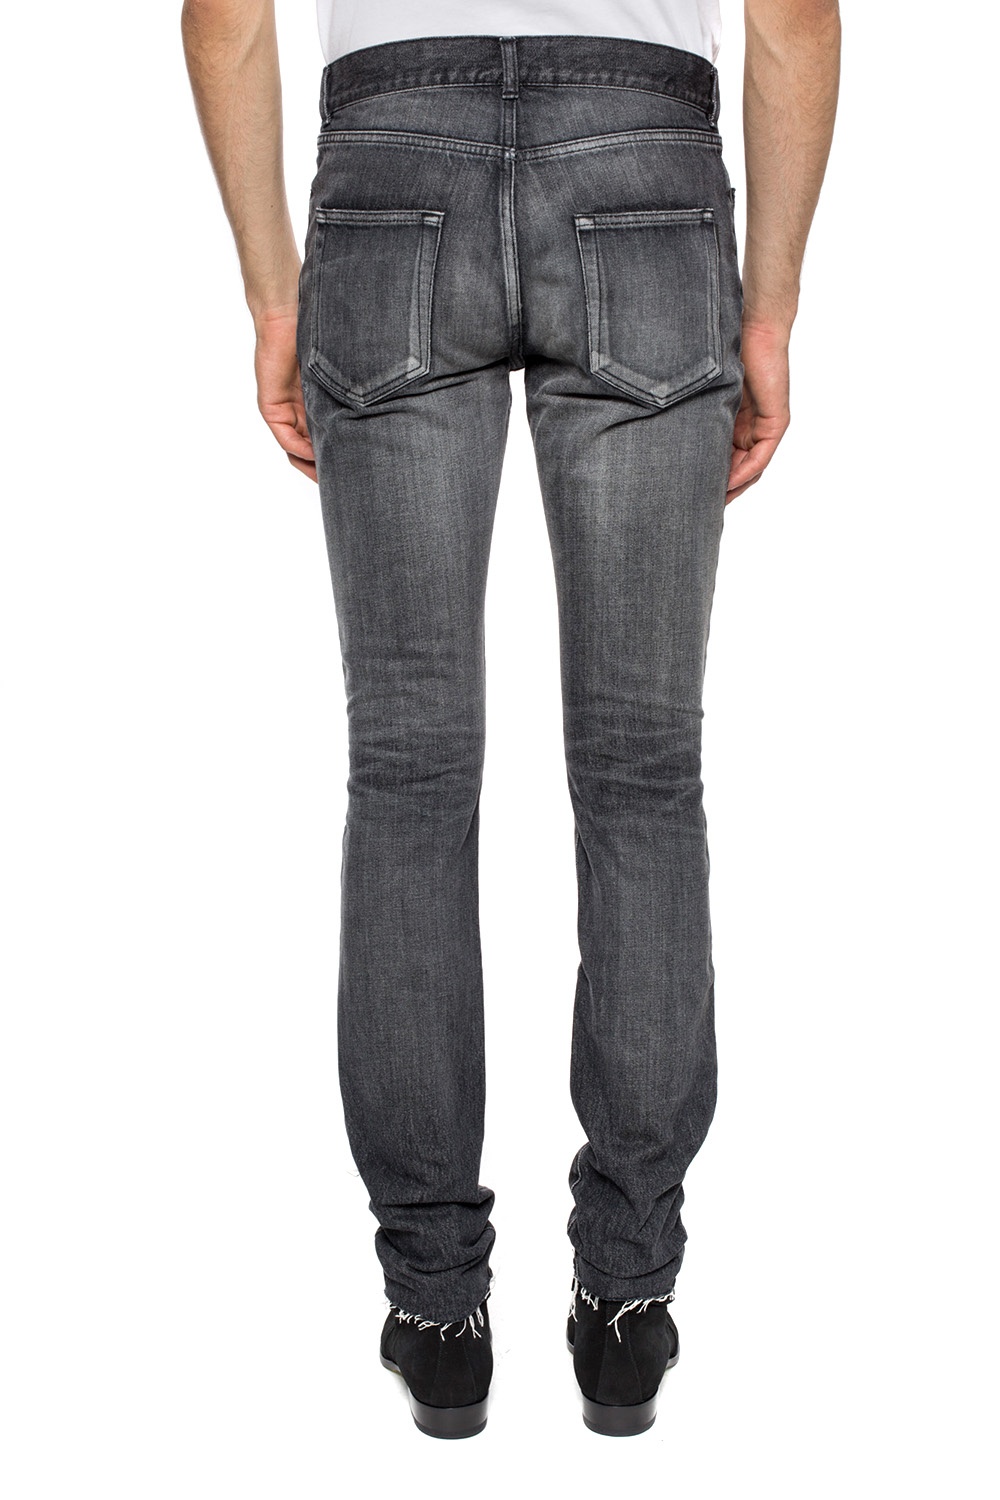 Saint Laurent Jeans with a raw finish | Men's Clothing | Vitkac